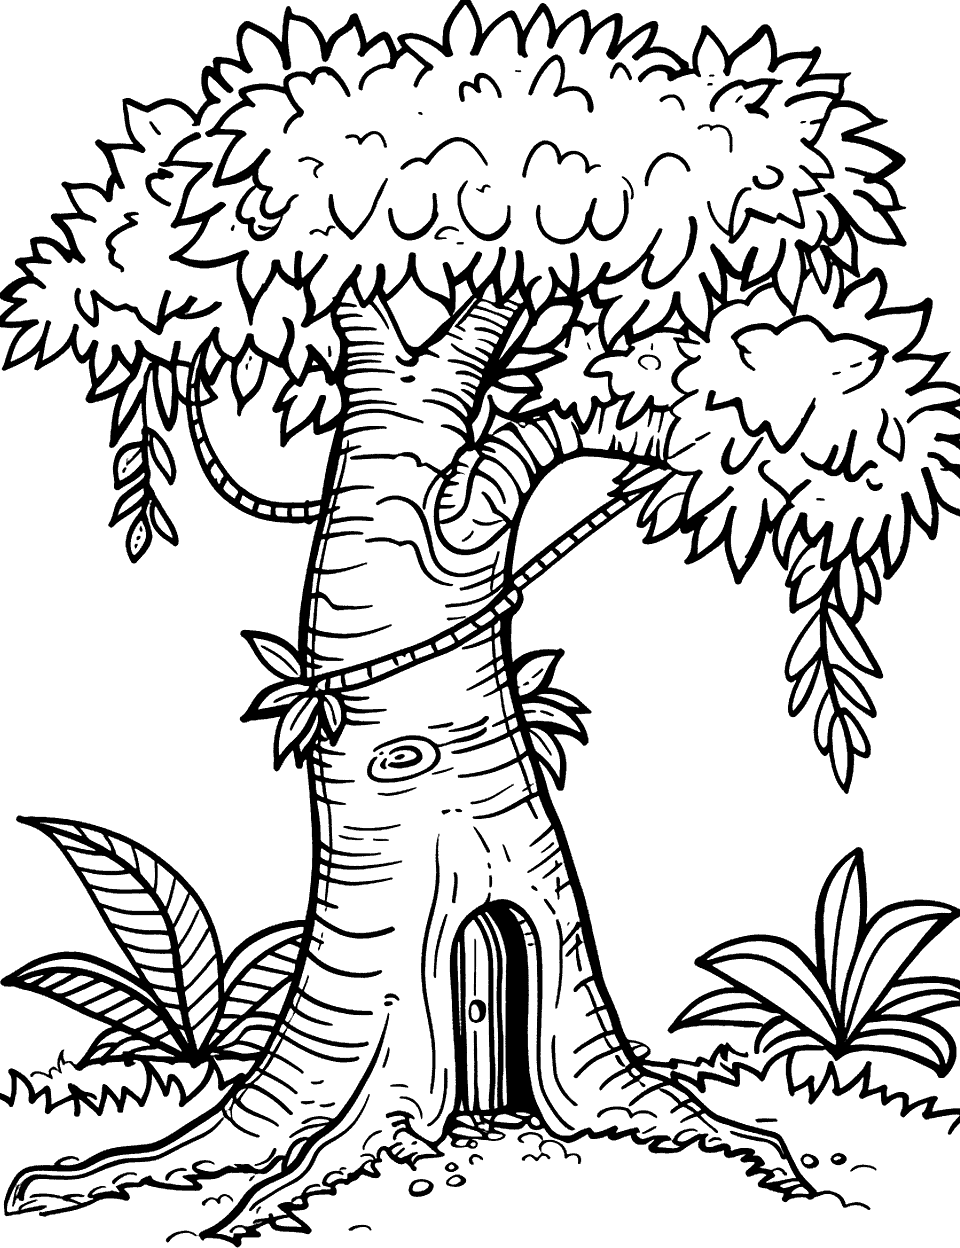 Enchanted Forest Entry Coloring Page - A single, mystical tree with a doorway in its trunk leading to an unknown world.